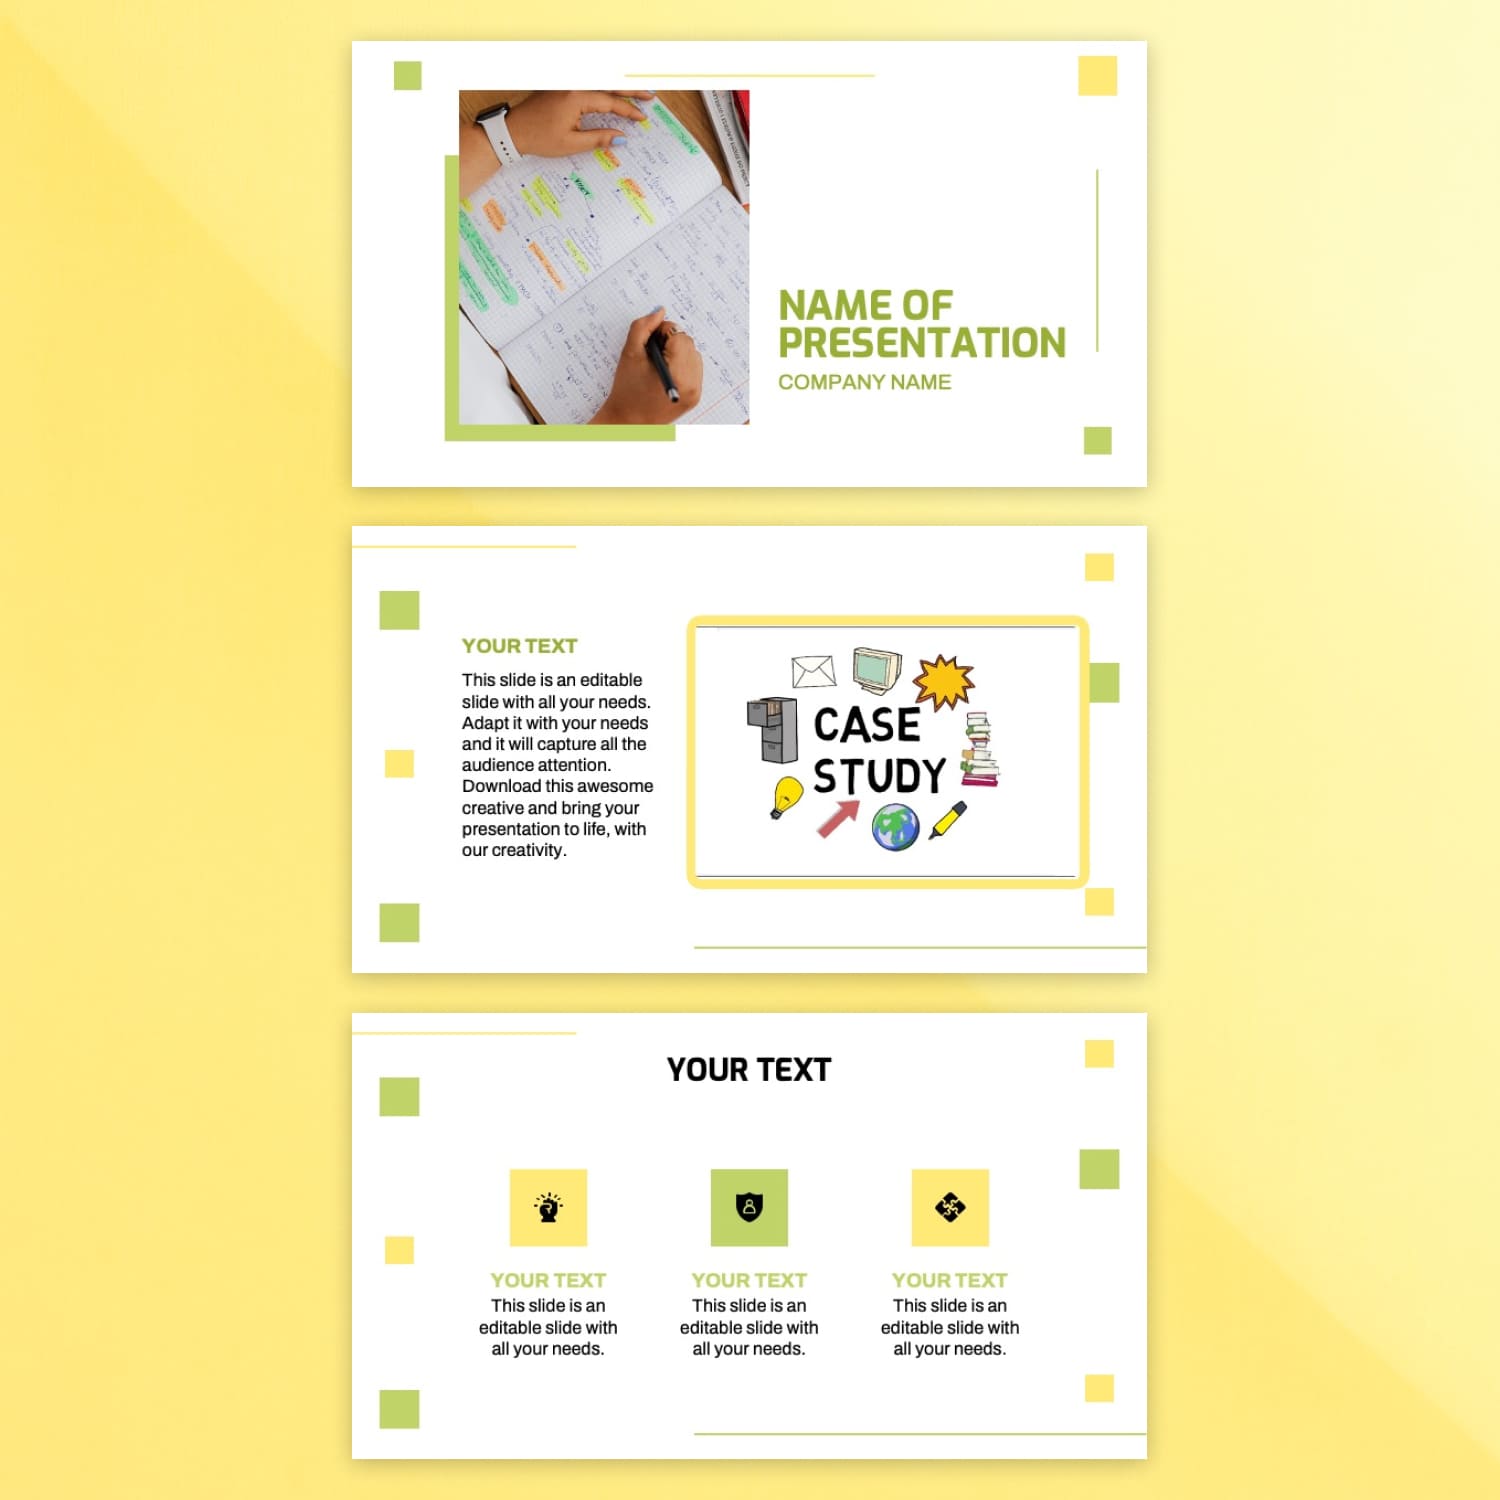 Case Study Powerpoint Template Free 1500 2.